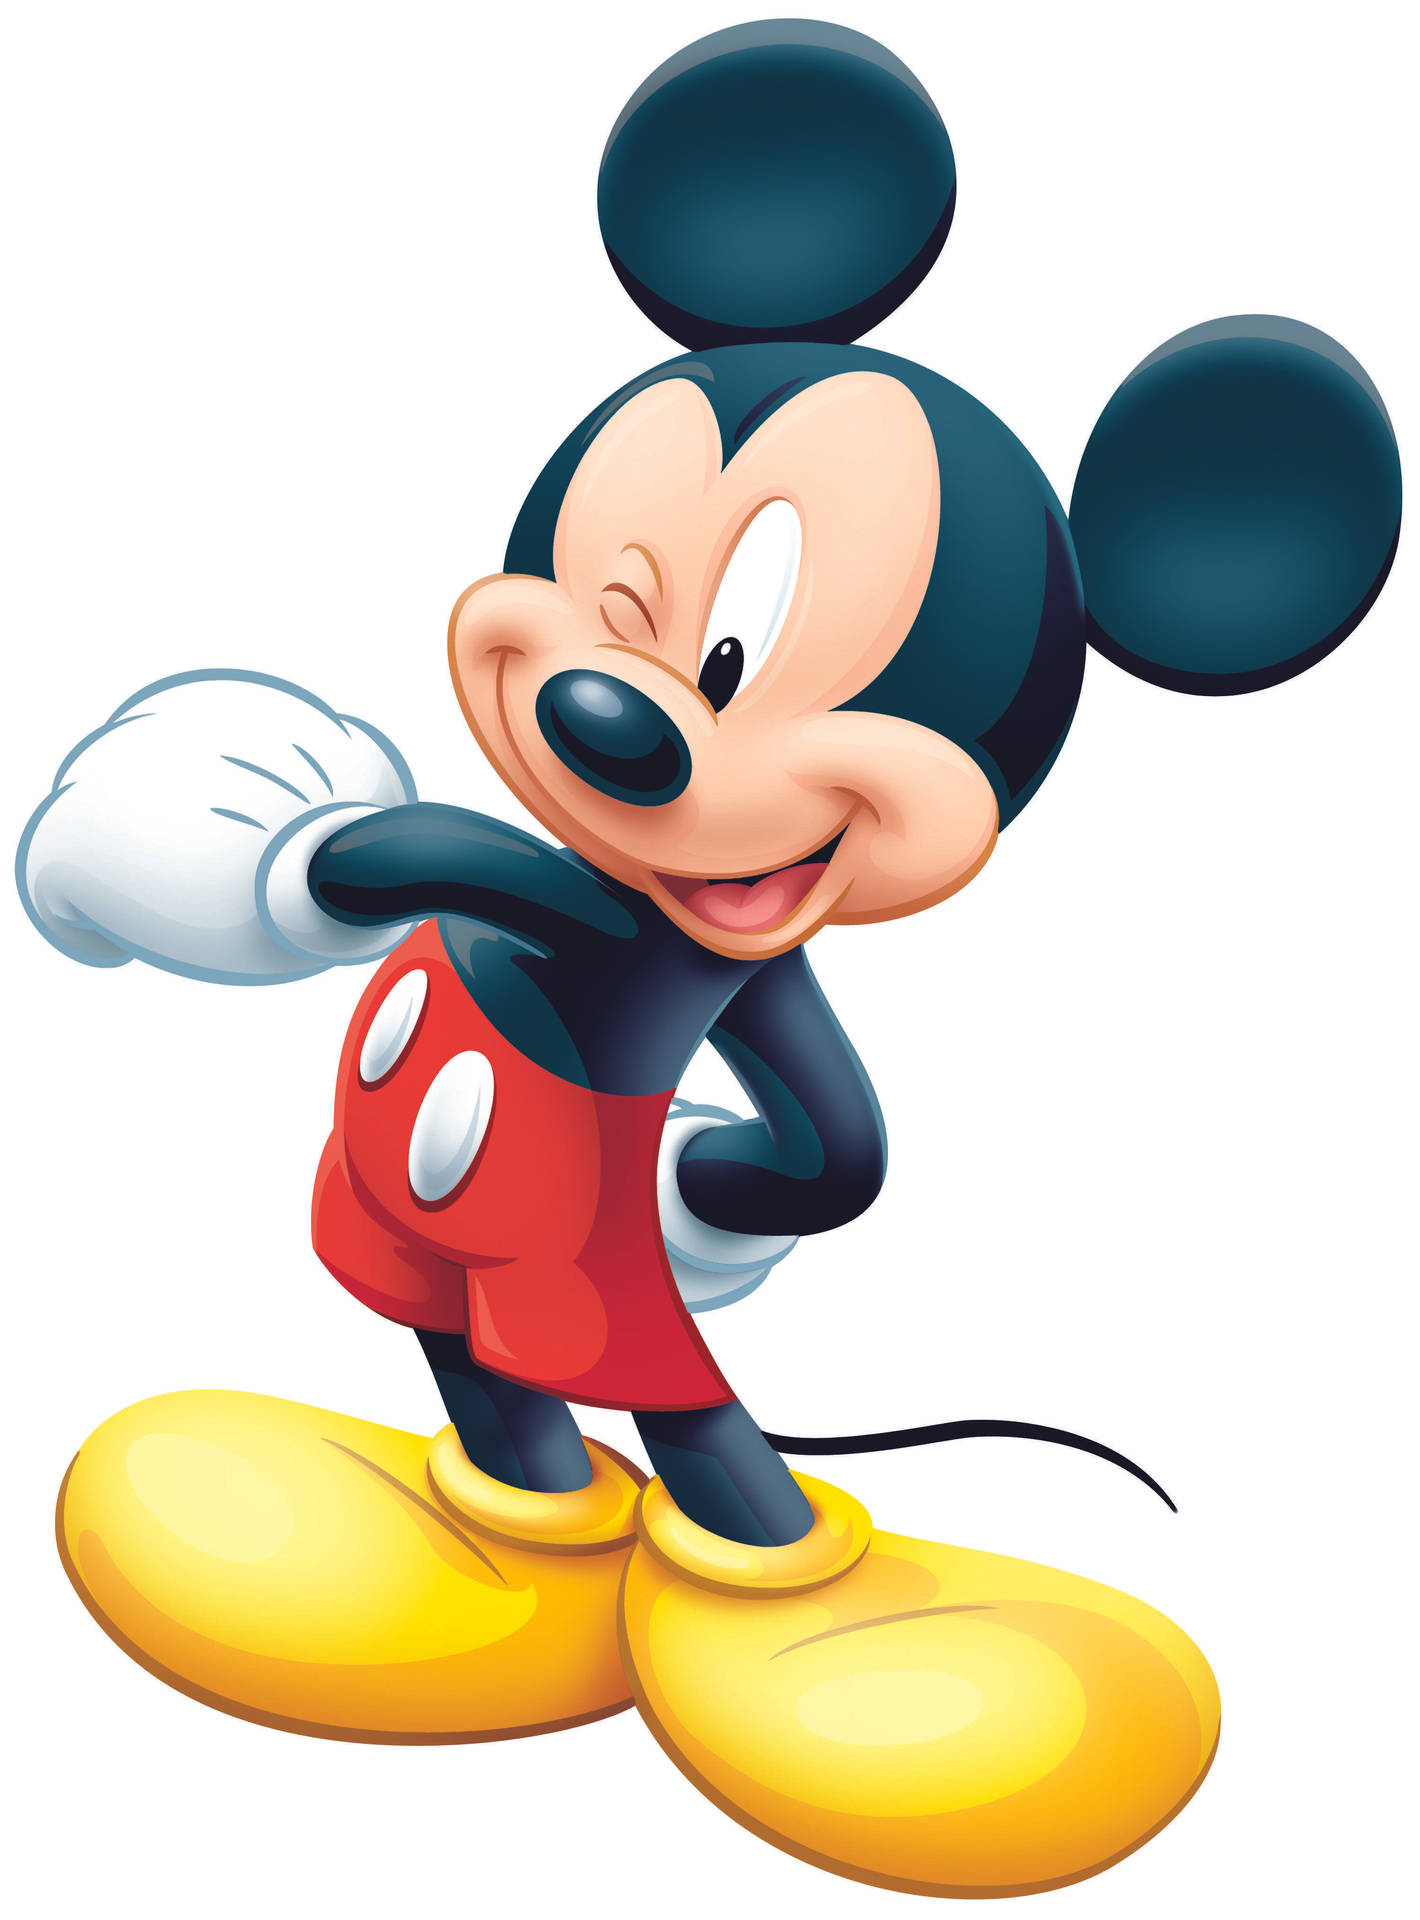 Winking Cartoon Mickey Mouse Hd Background